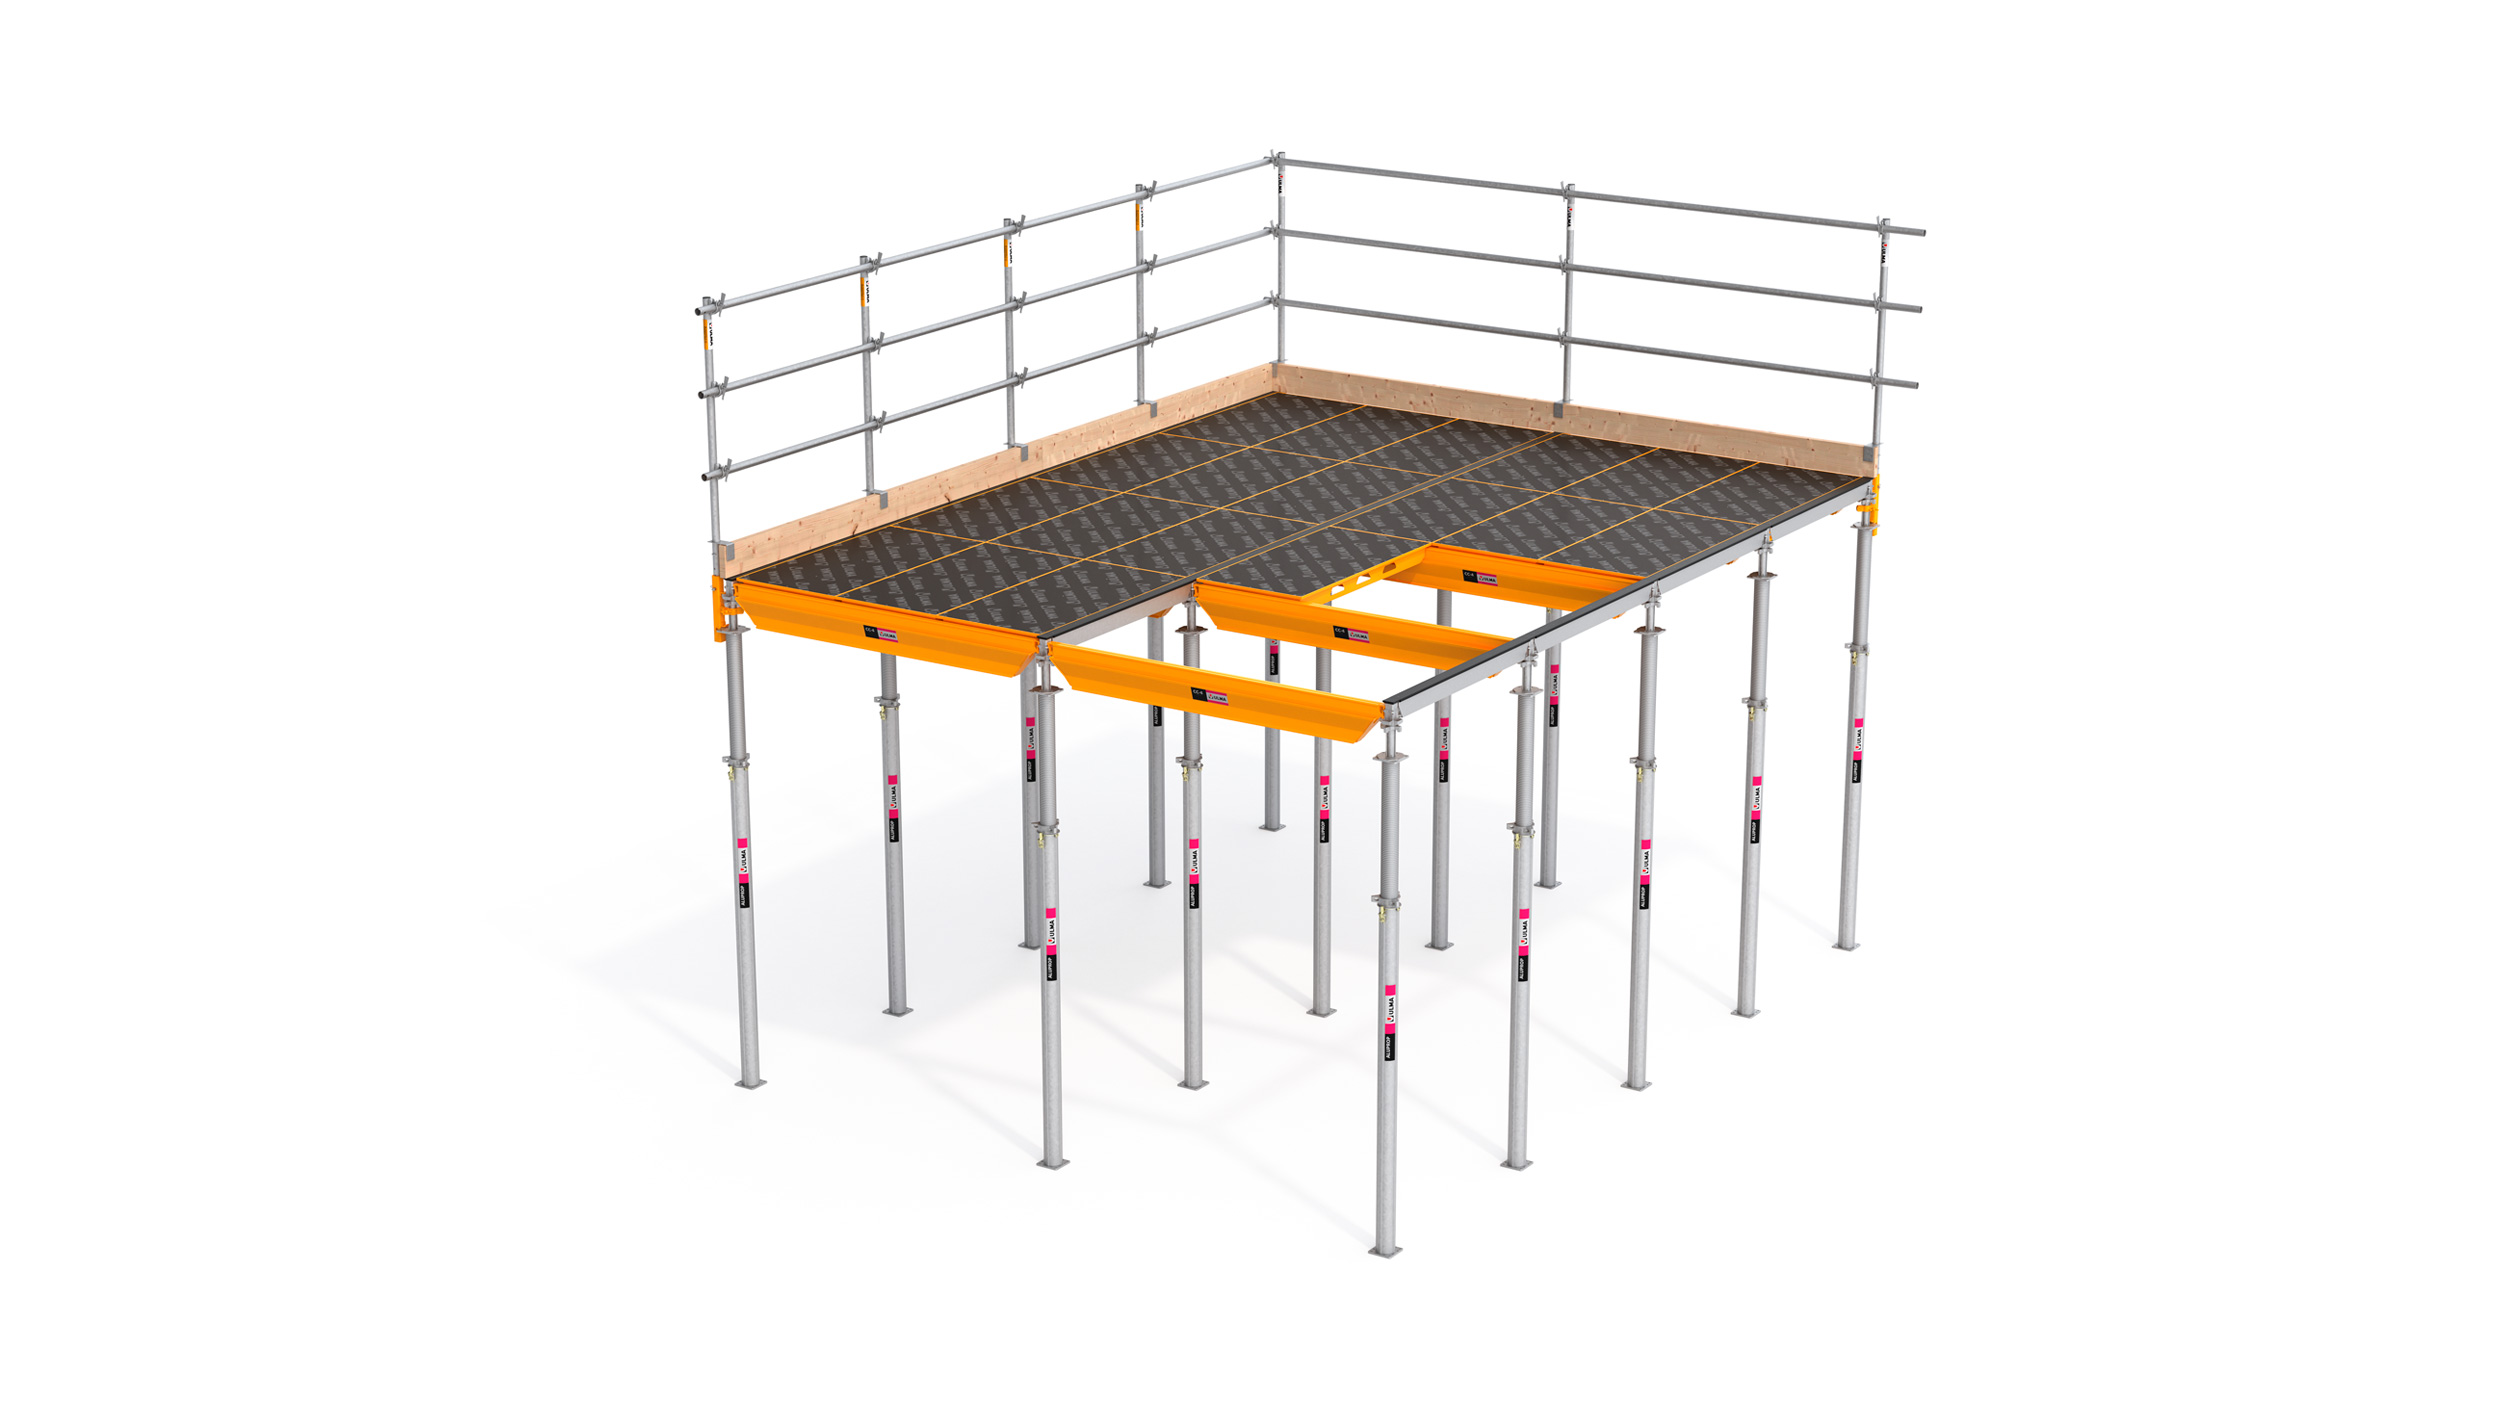 Very flexible and safe formwork that provides high performance rates on site. Perfect for solid or lightened slabs. Highlights: Fast striking with the drophead system and handset components.